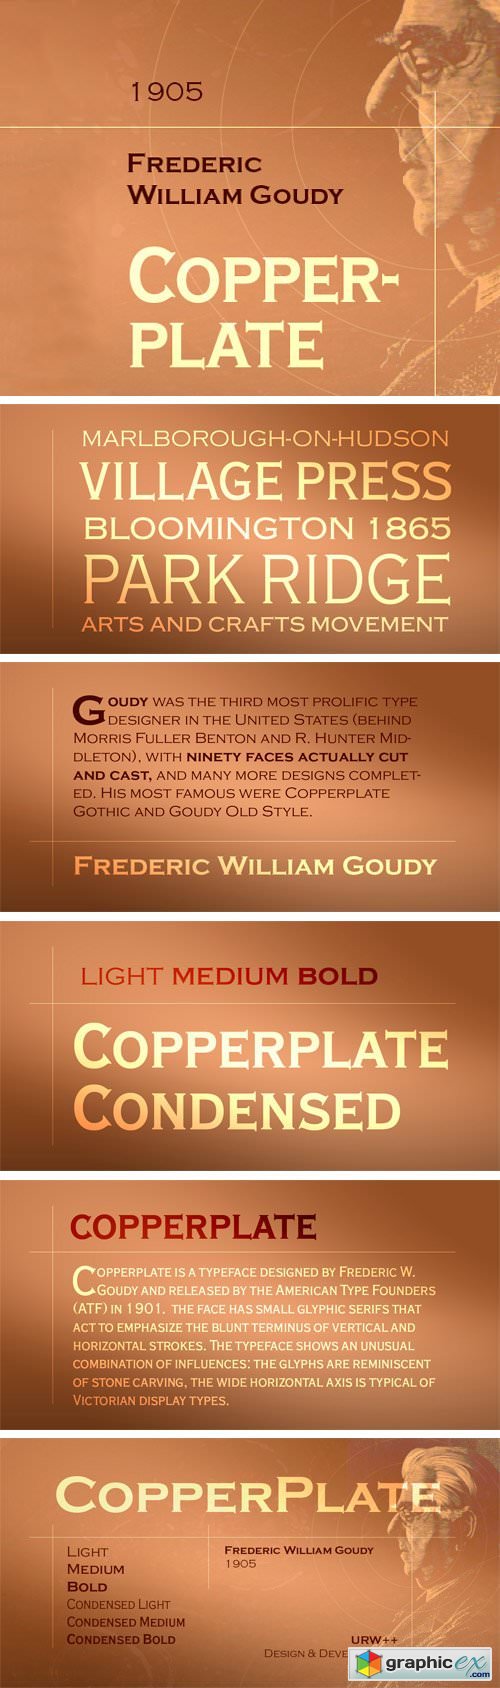 Copperplate Font Family